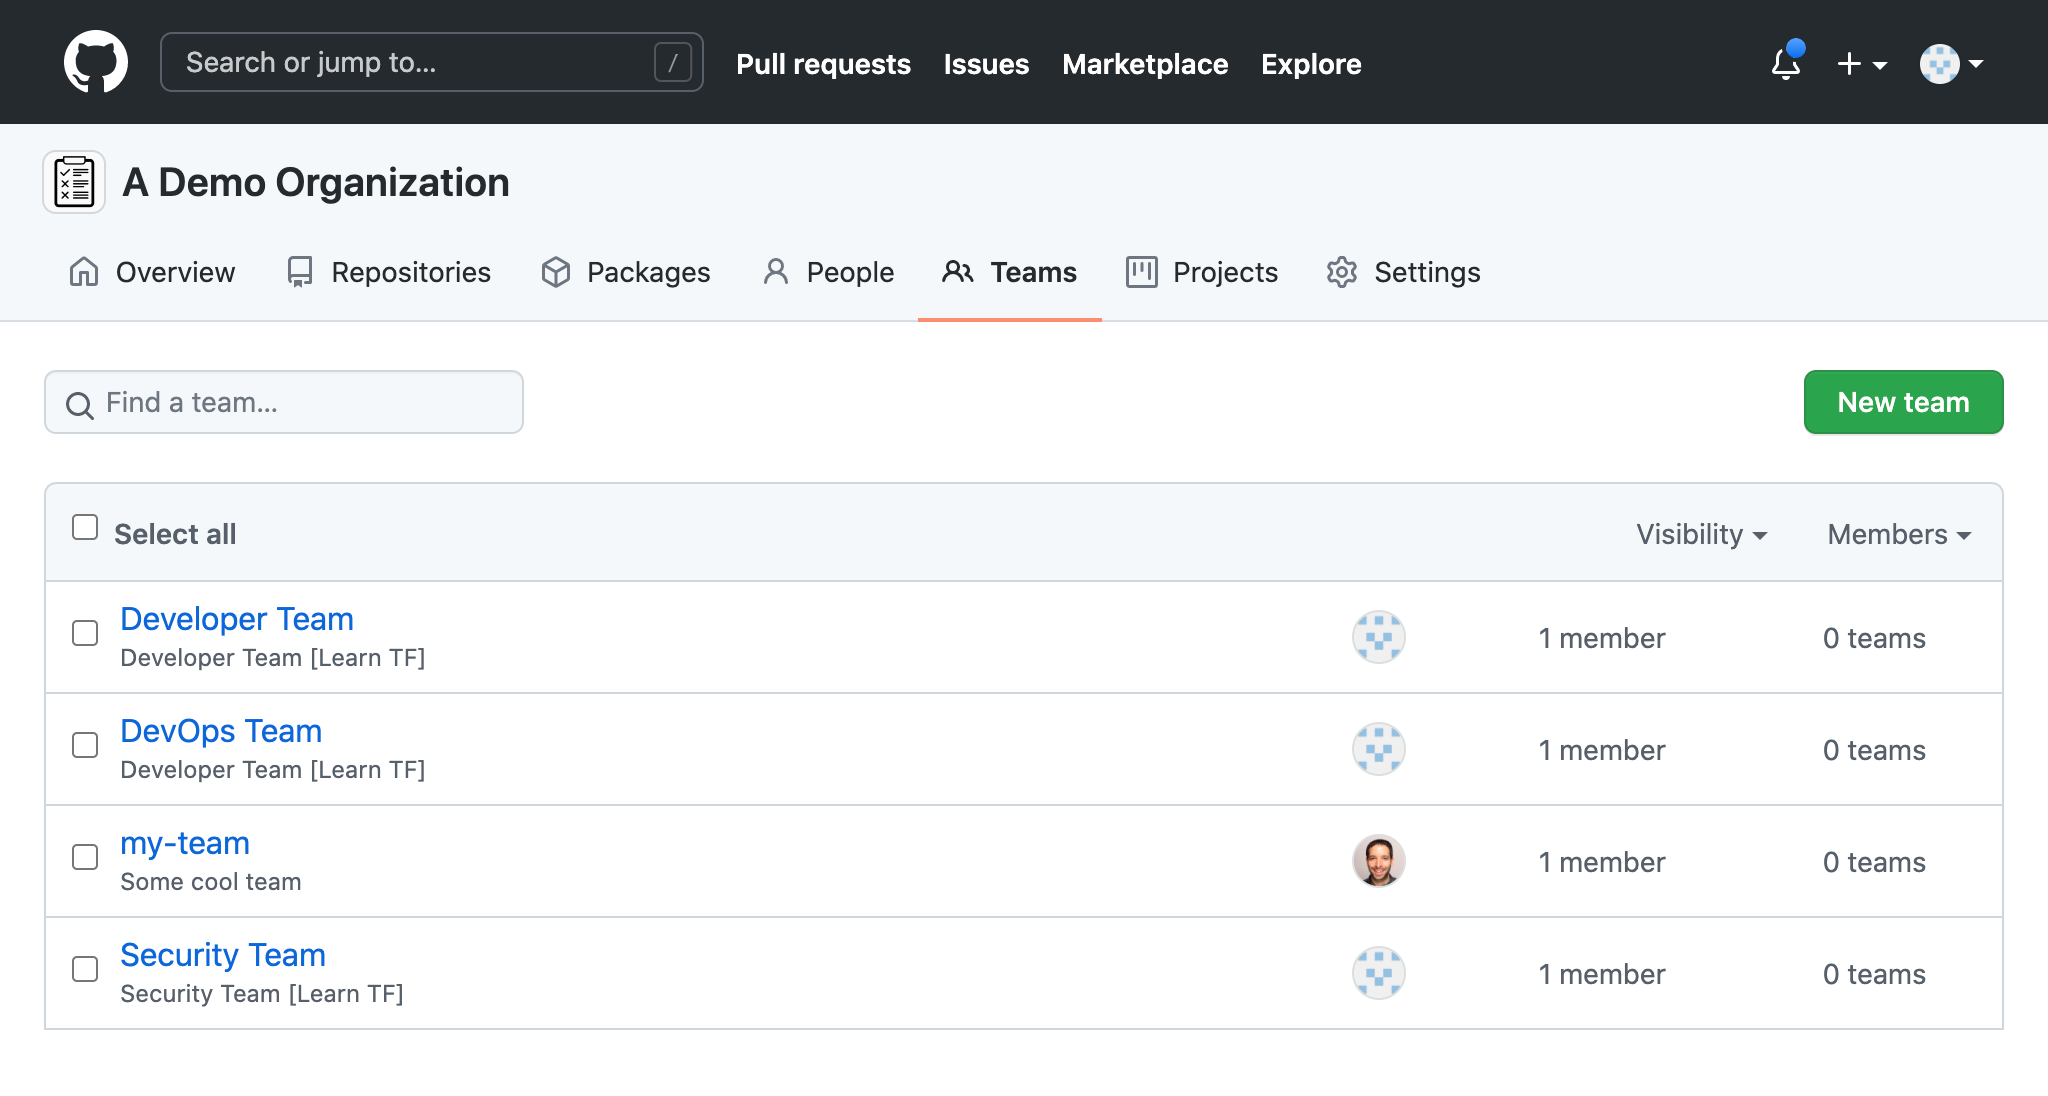 The Github organization teams page now has a developer, security and DevOps team.